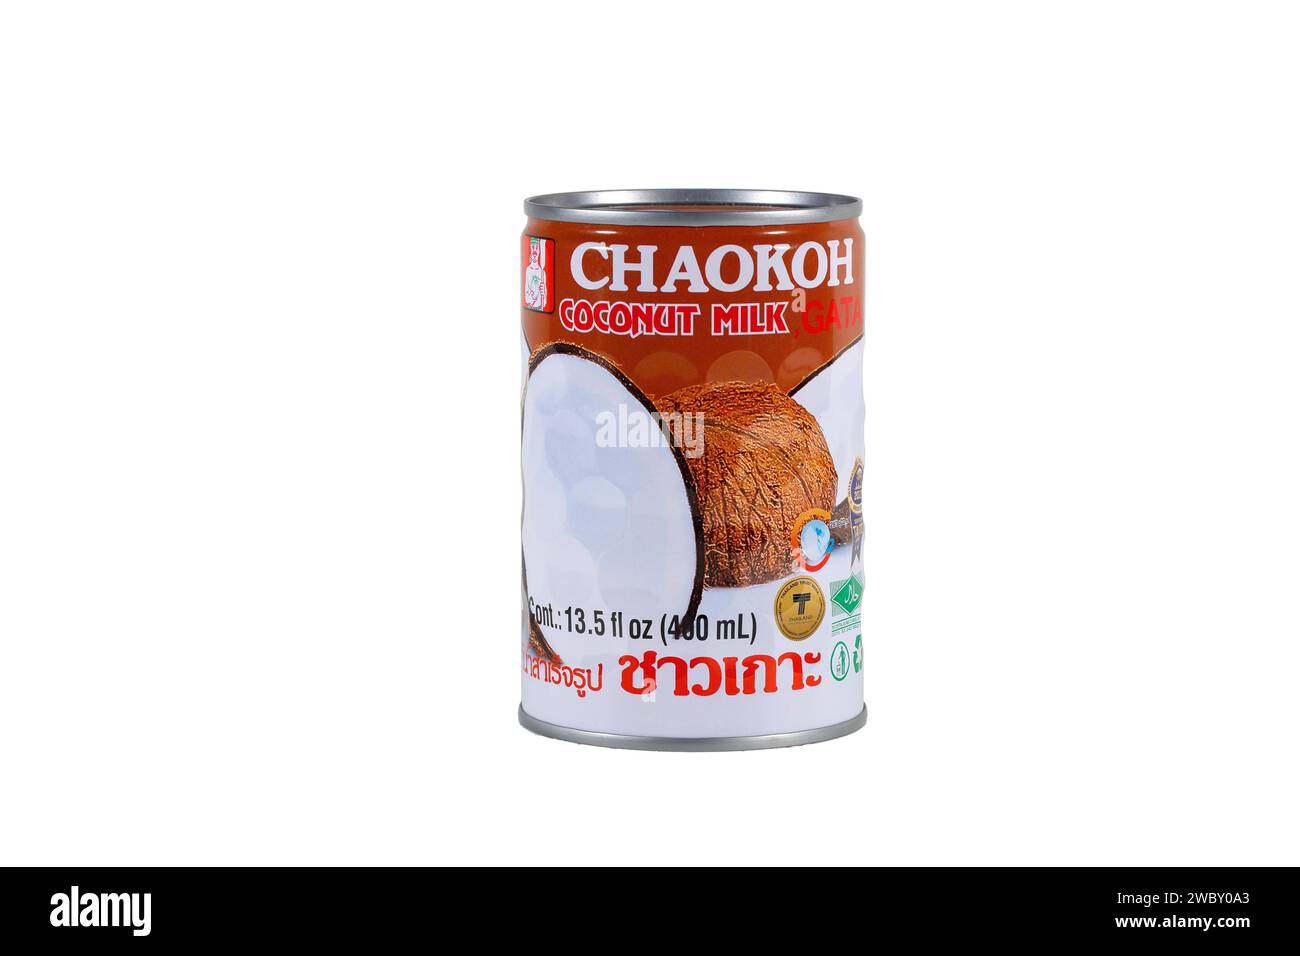 A can of Chaokoh brand Coconut Milk isolated on a white background. cutout image for illustration and editorial use. Stock Photo